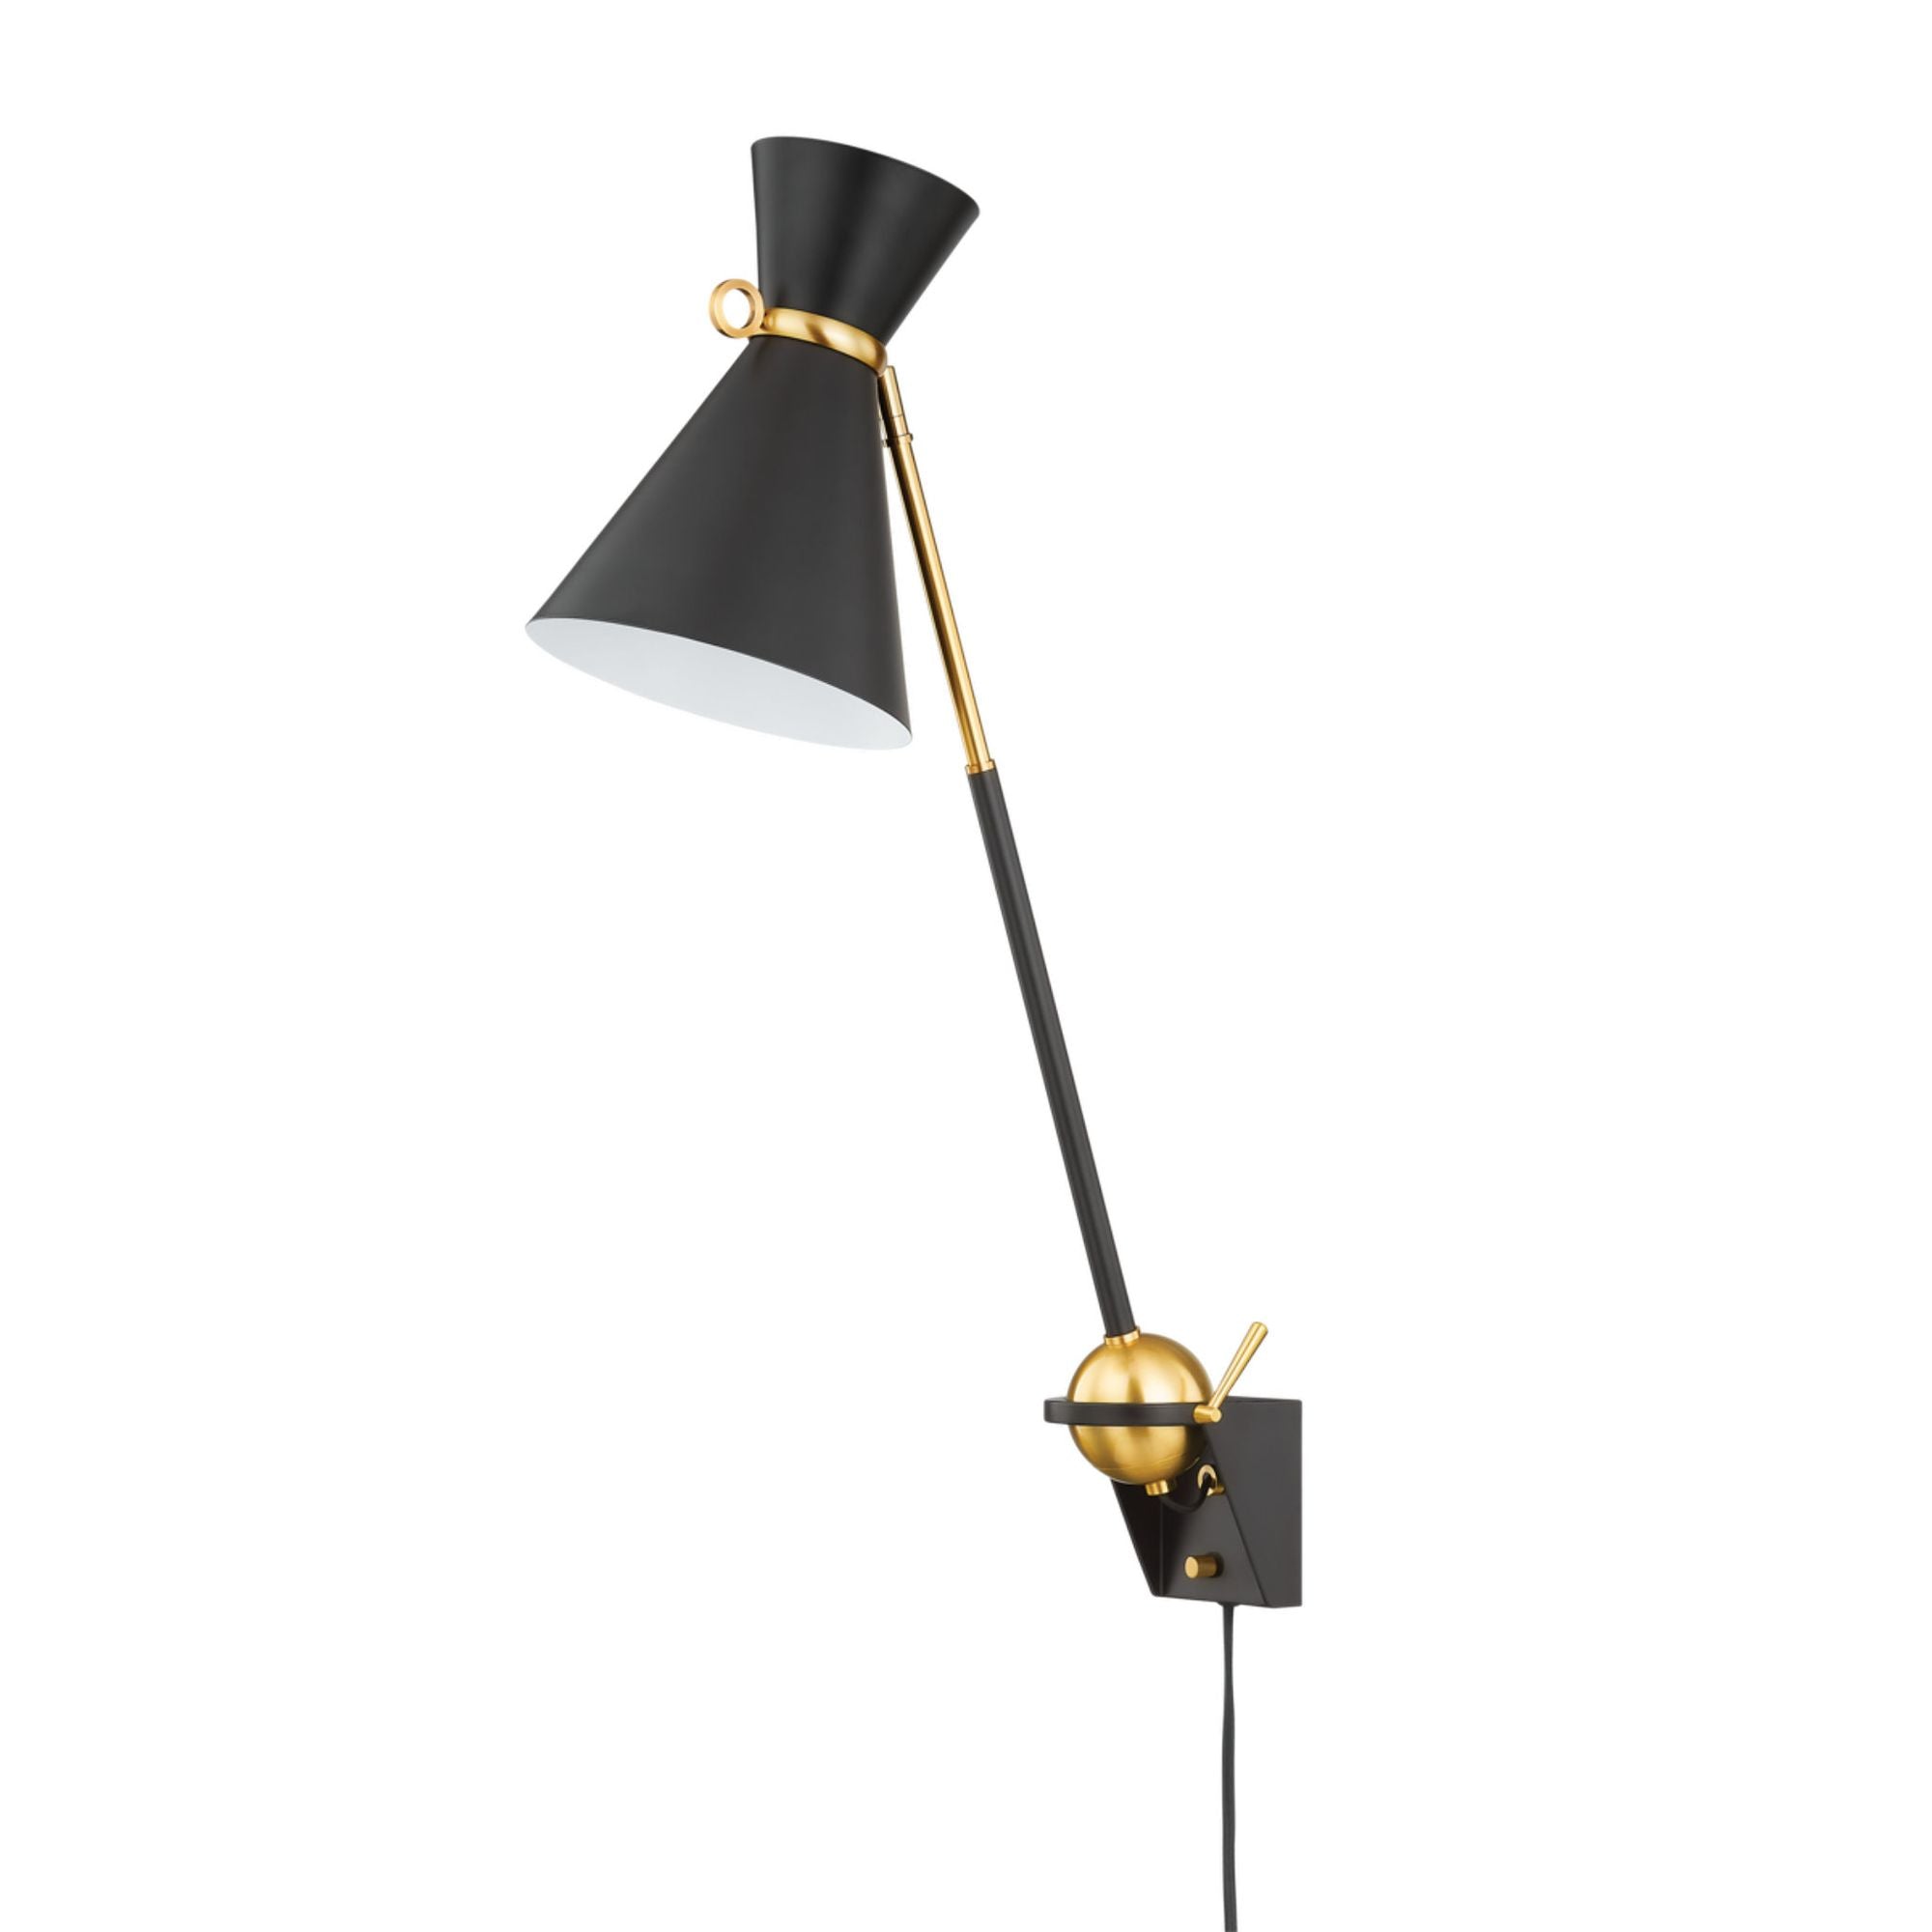 Winsted 1 Light Plug-in Sconce in Aged Brass/Soft Black